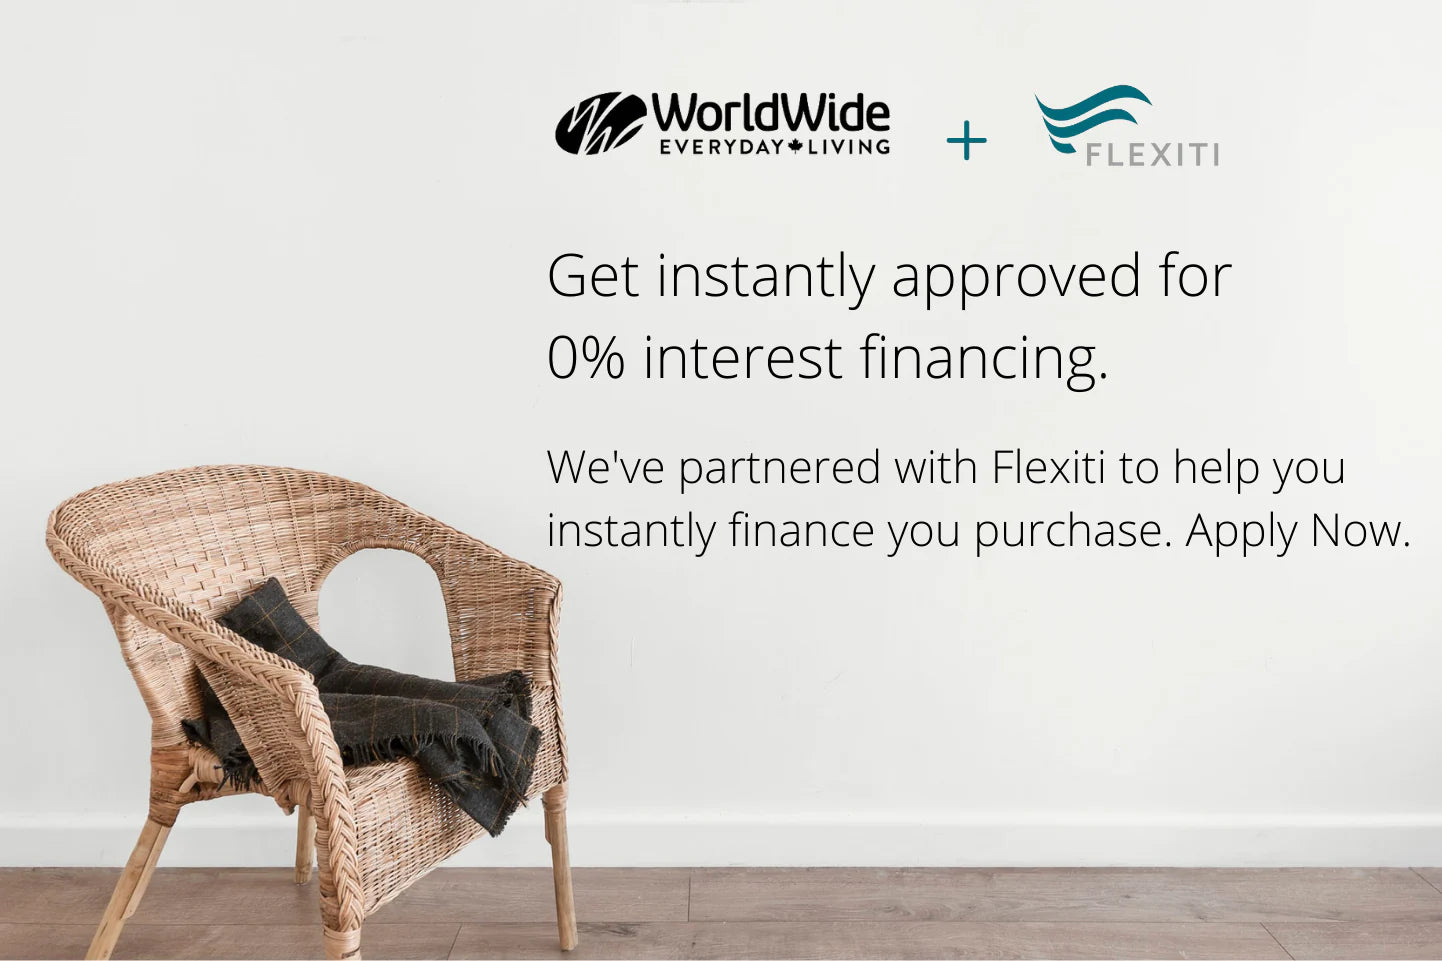 Get Instantly Approved for 0% Financing